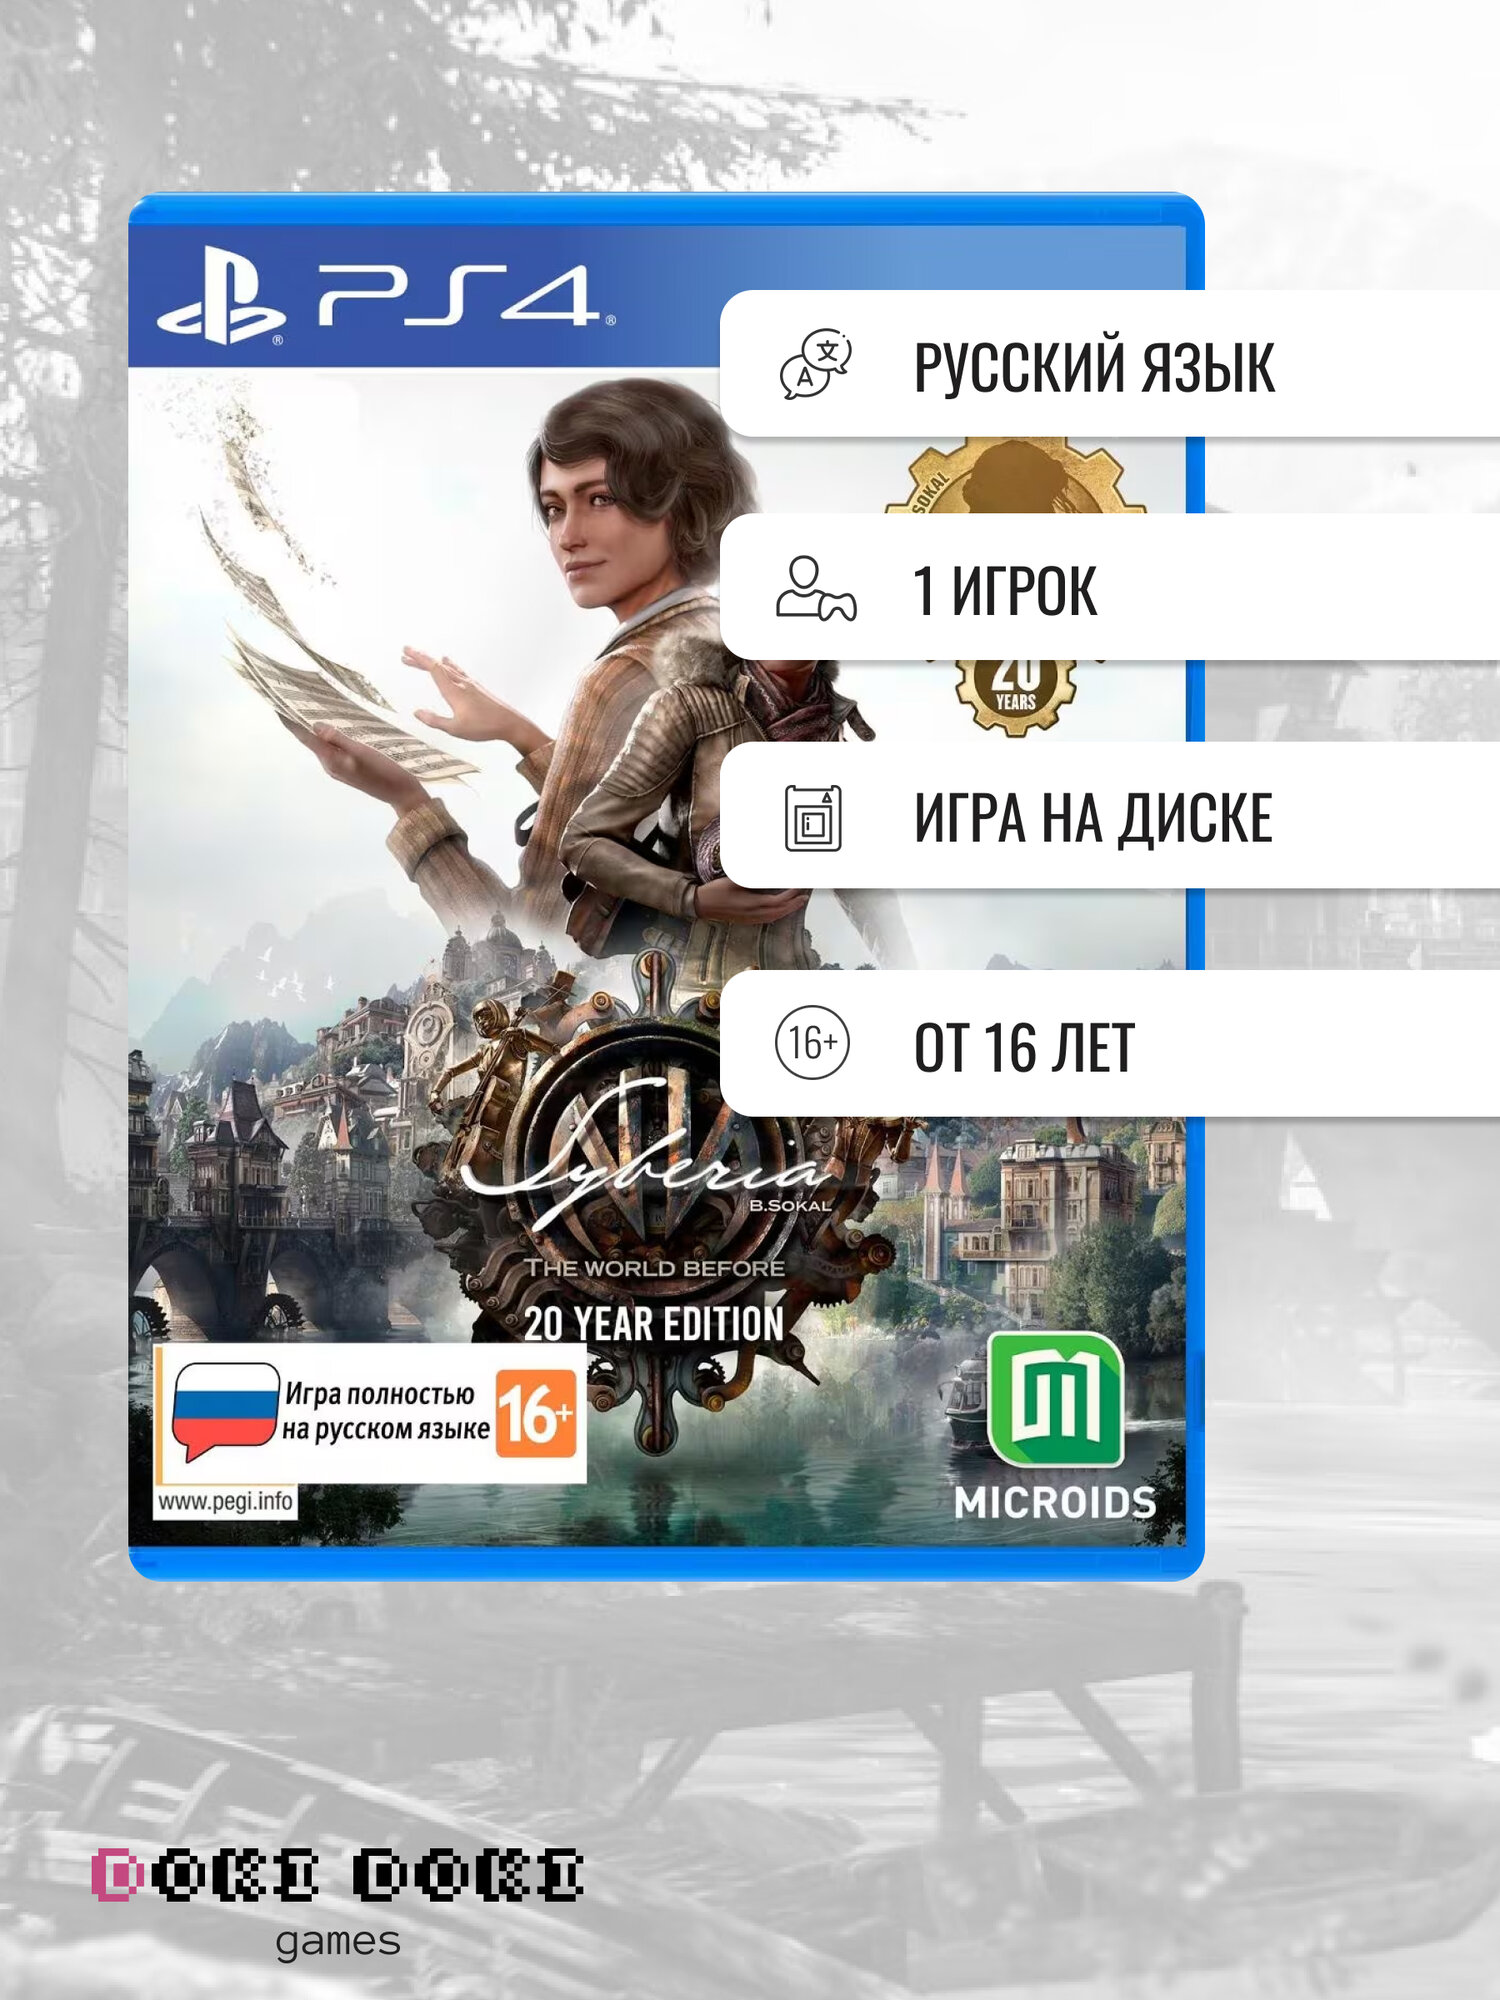 Syberia: The World Before 20 Year Edition (PlayStation 4 русские субтитры)